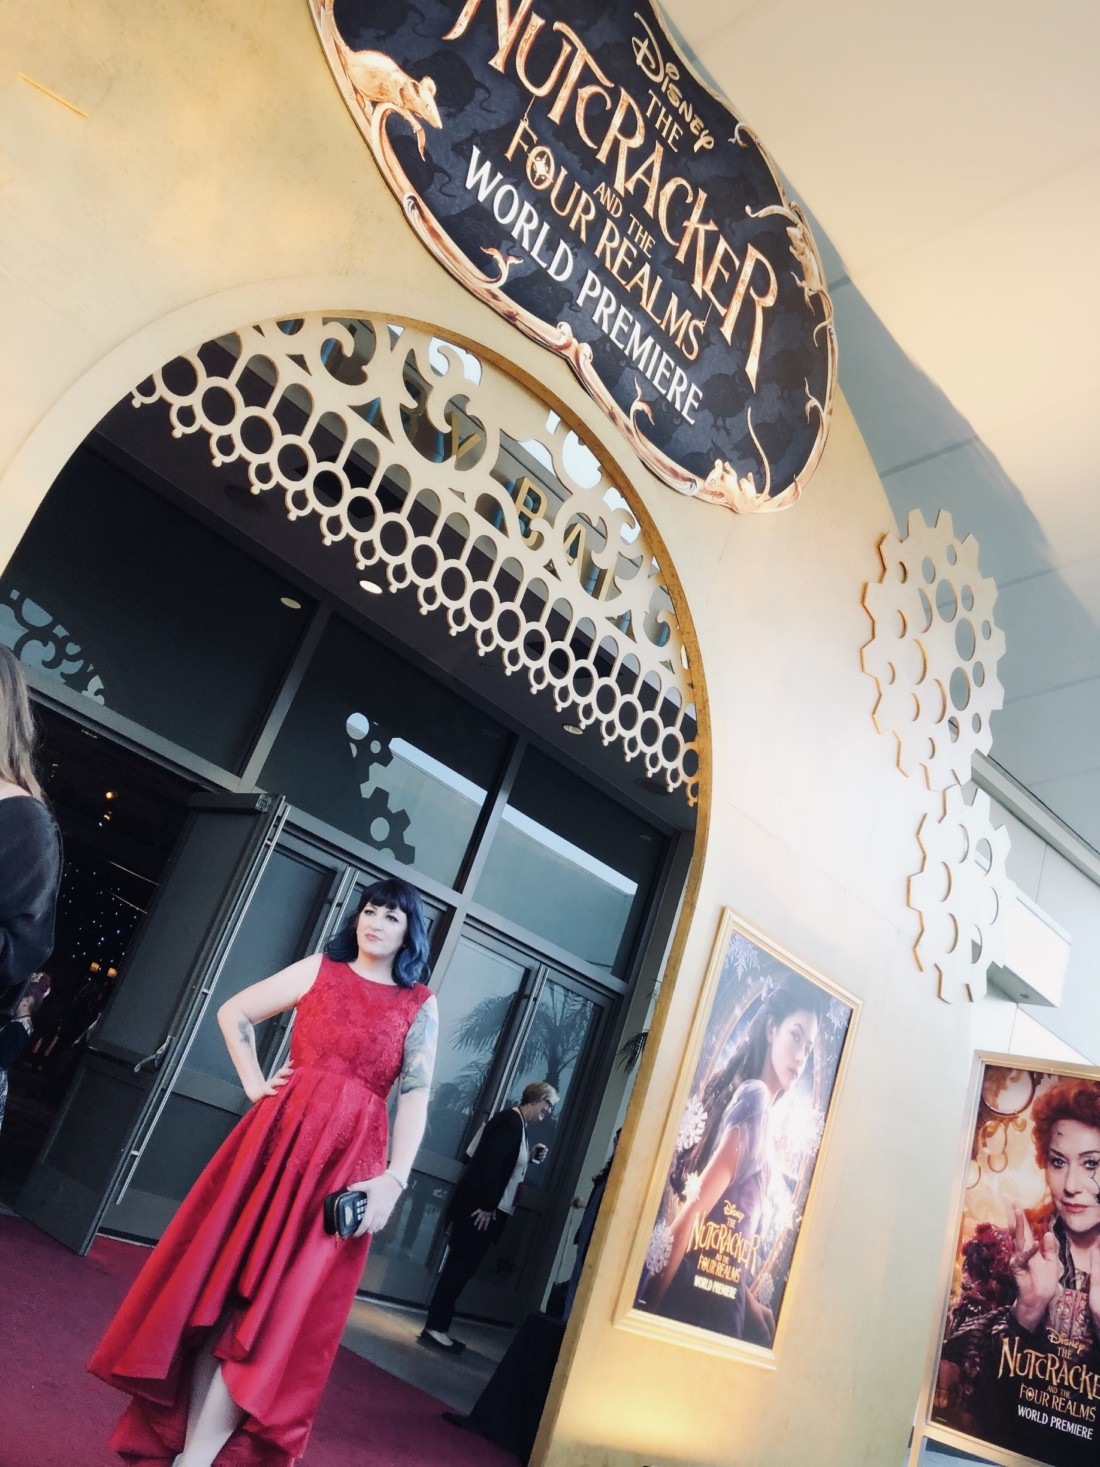 I Went To The Nutcracker And The Four Realms Red Carpet Premiere Party!